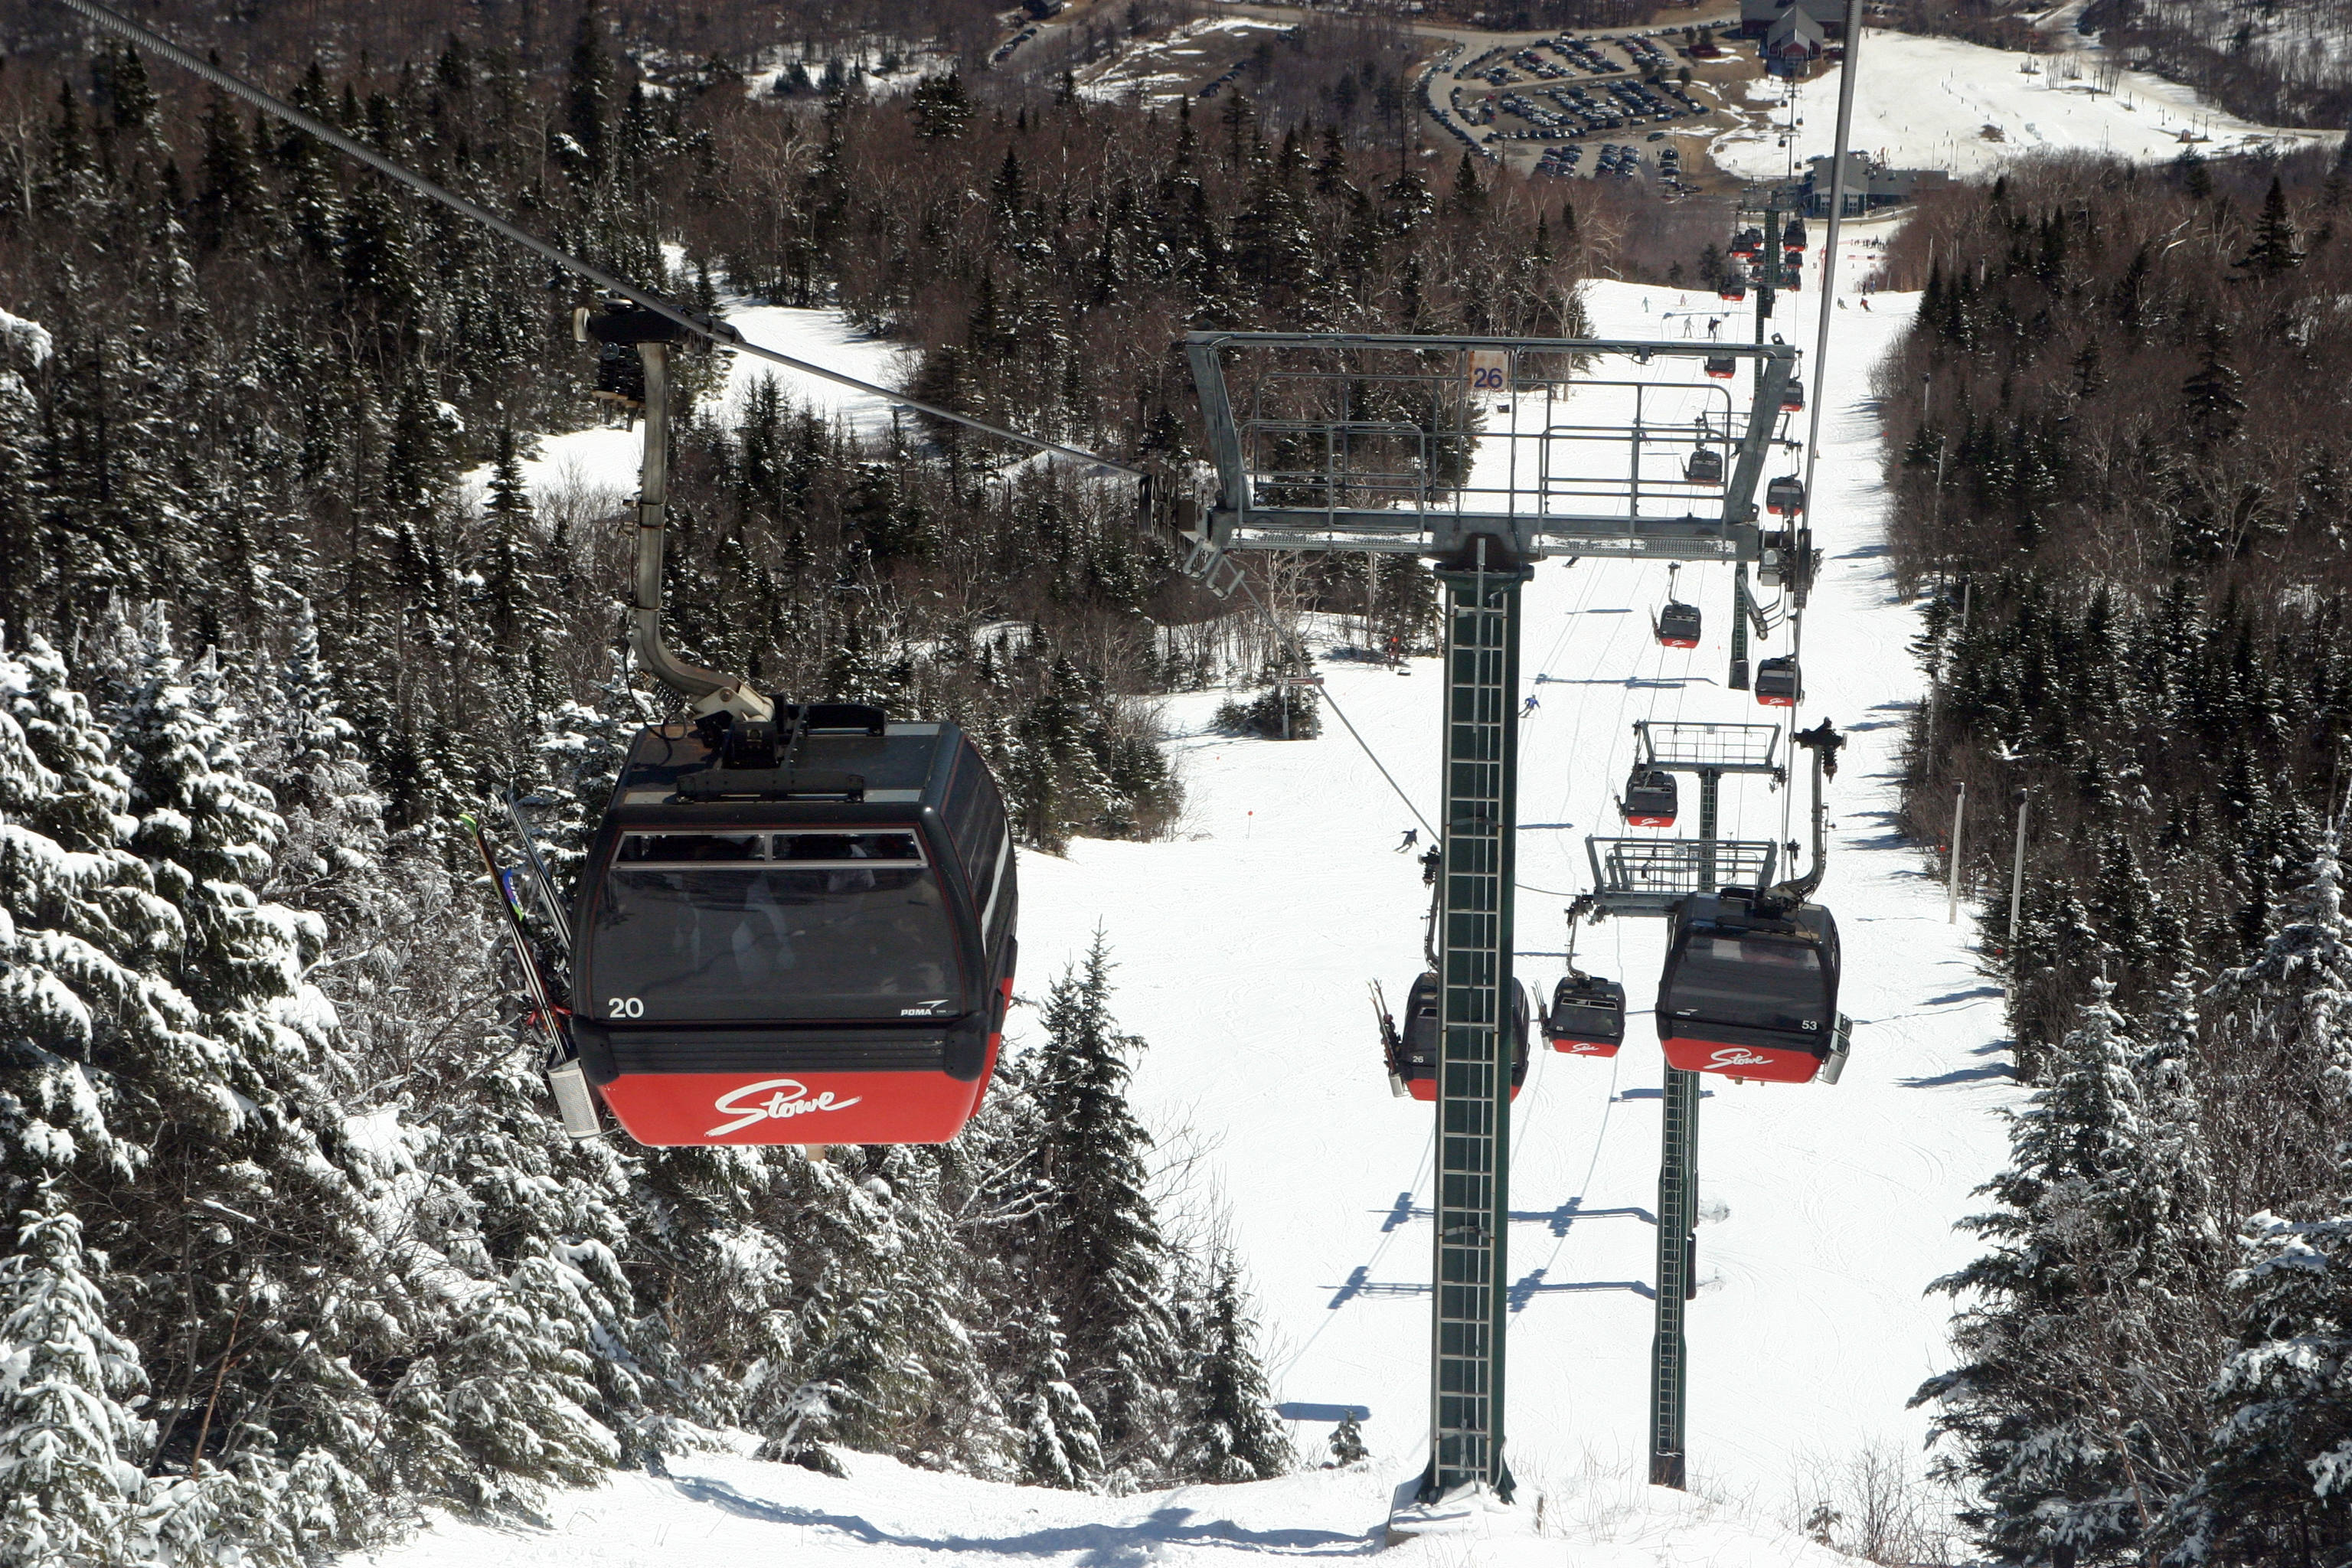 Stowe Gondola; Places to visit in Vermont